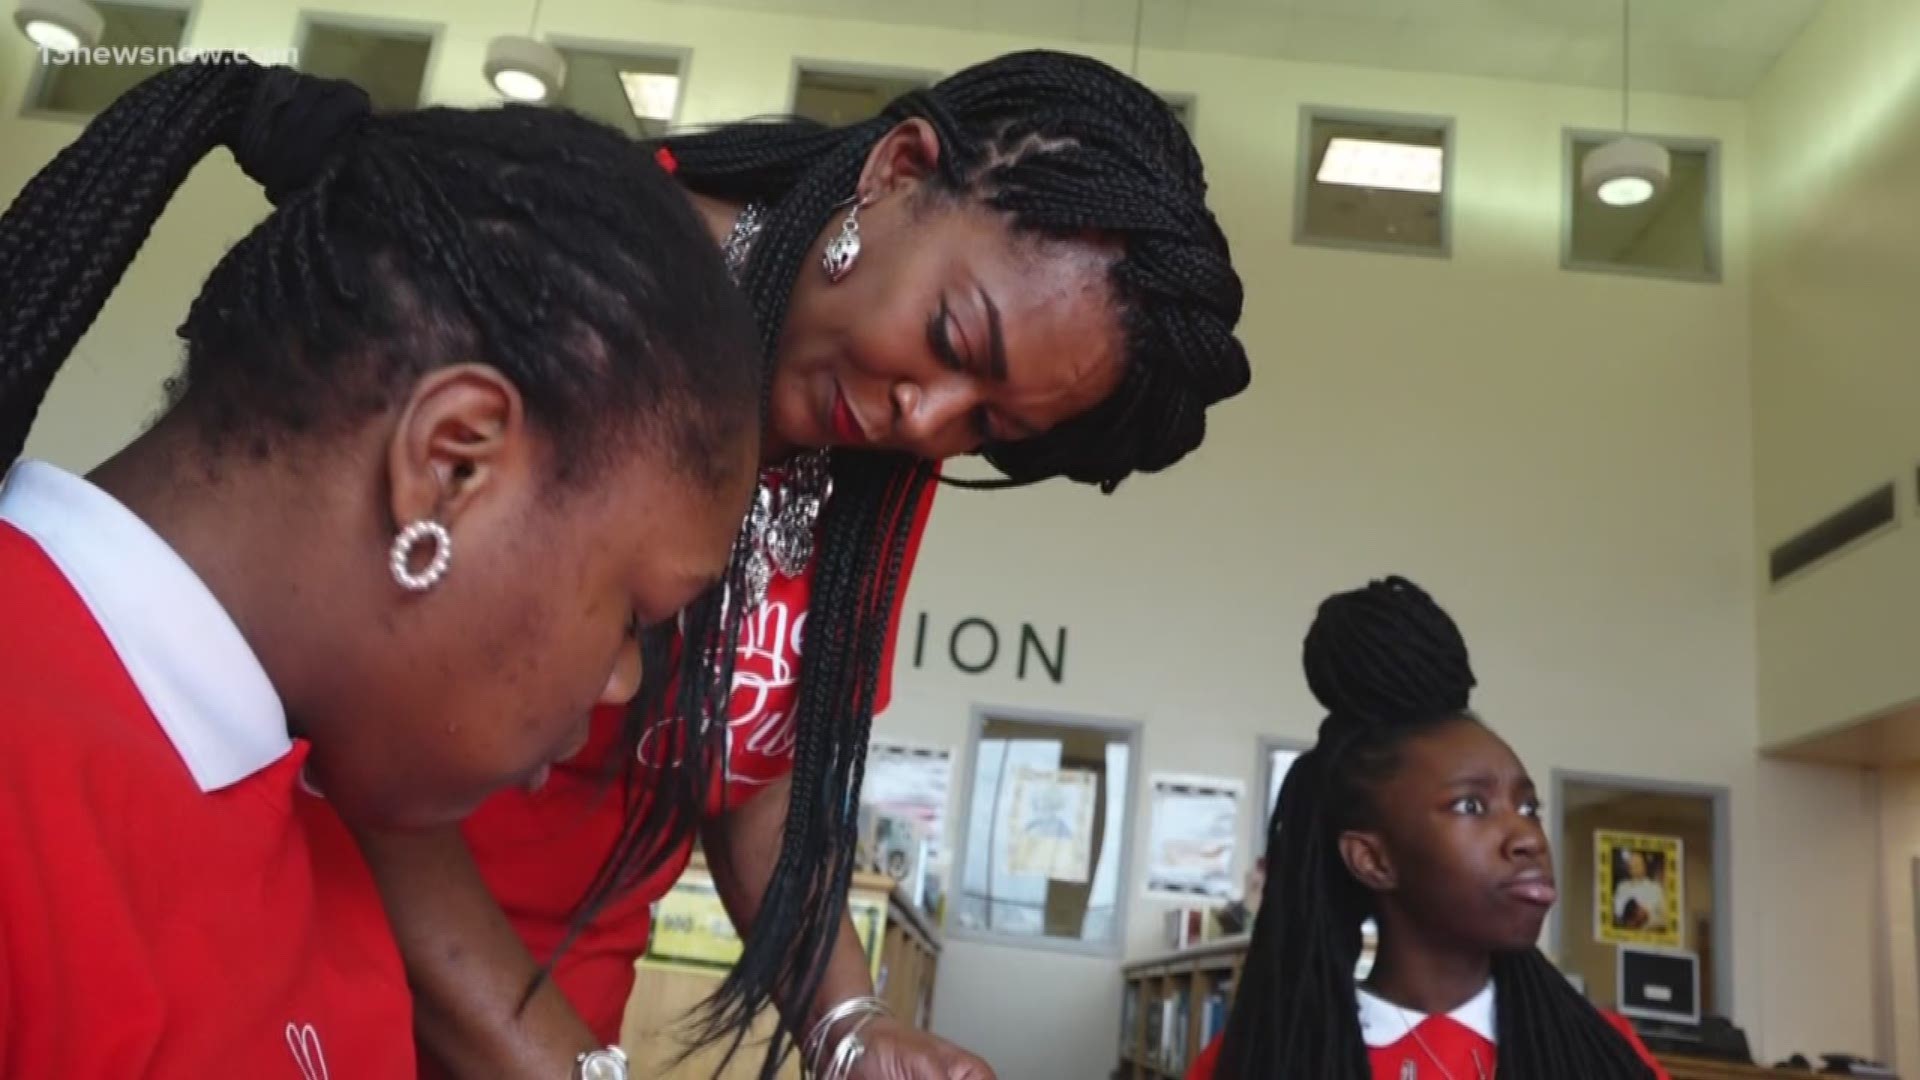 MAKING A MARK: A woman makes it her mission to inspire young girls.